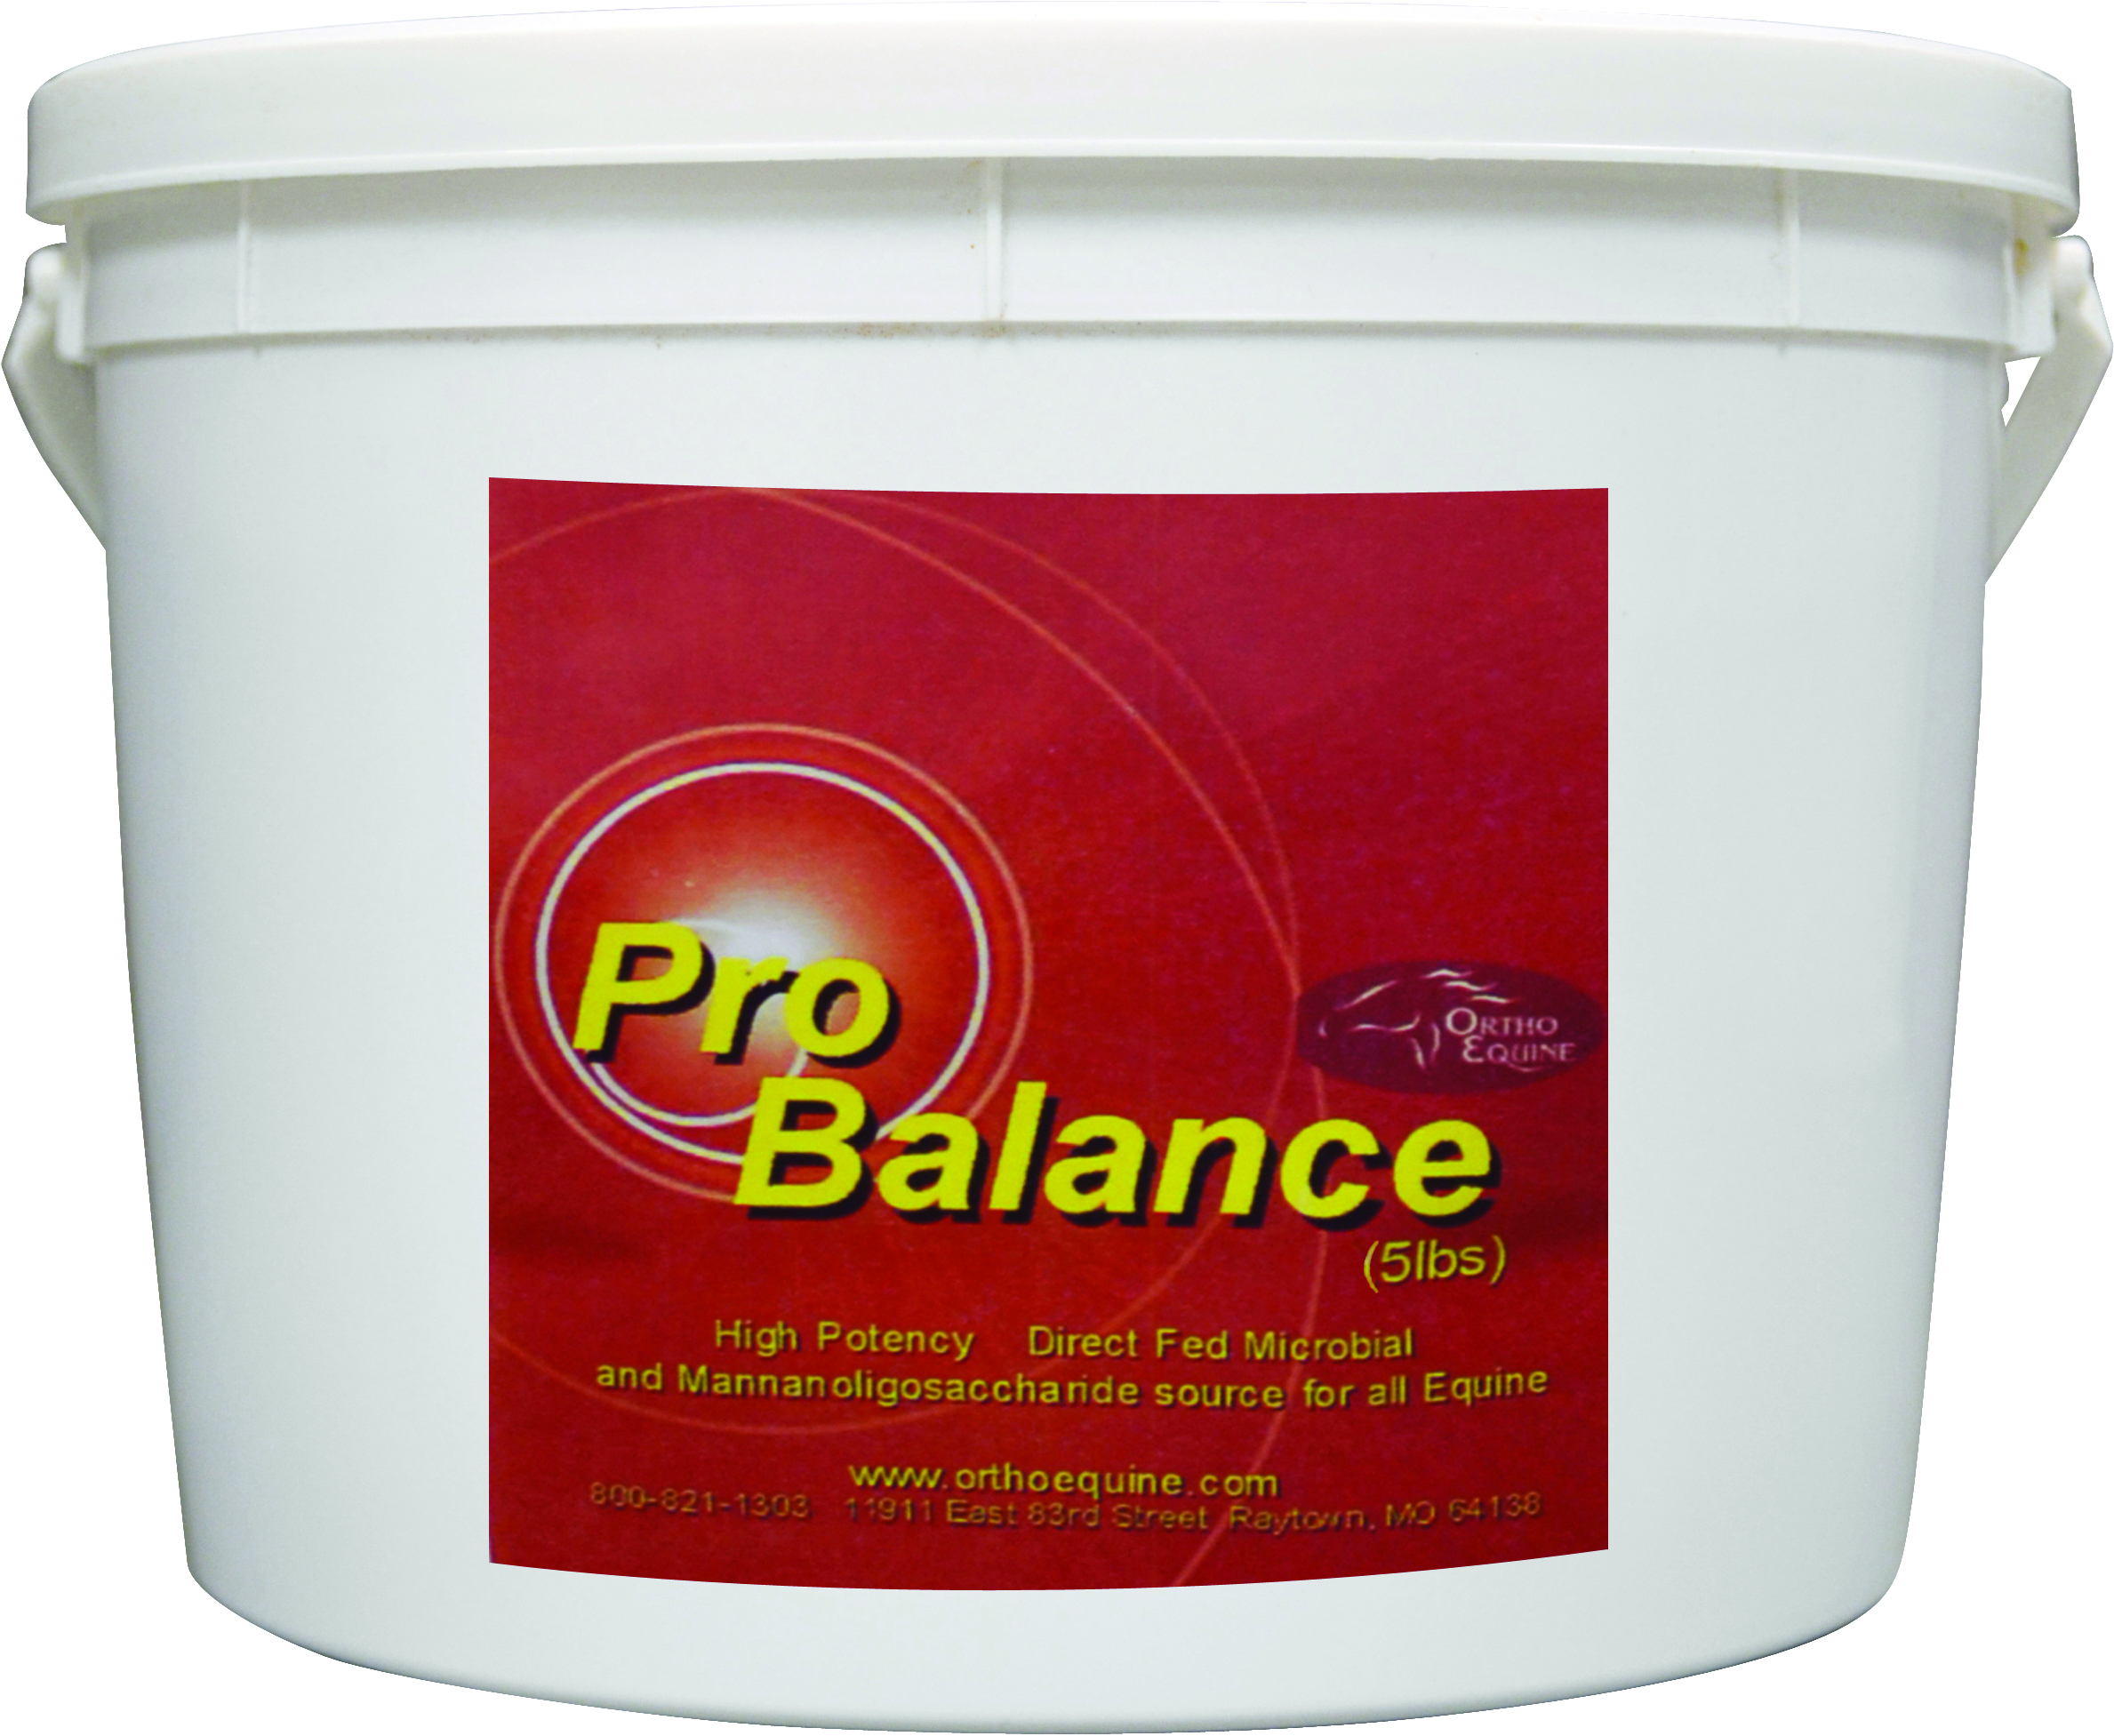 PRO BALANCE DAILY PROBIOTIC FOR HORSES